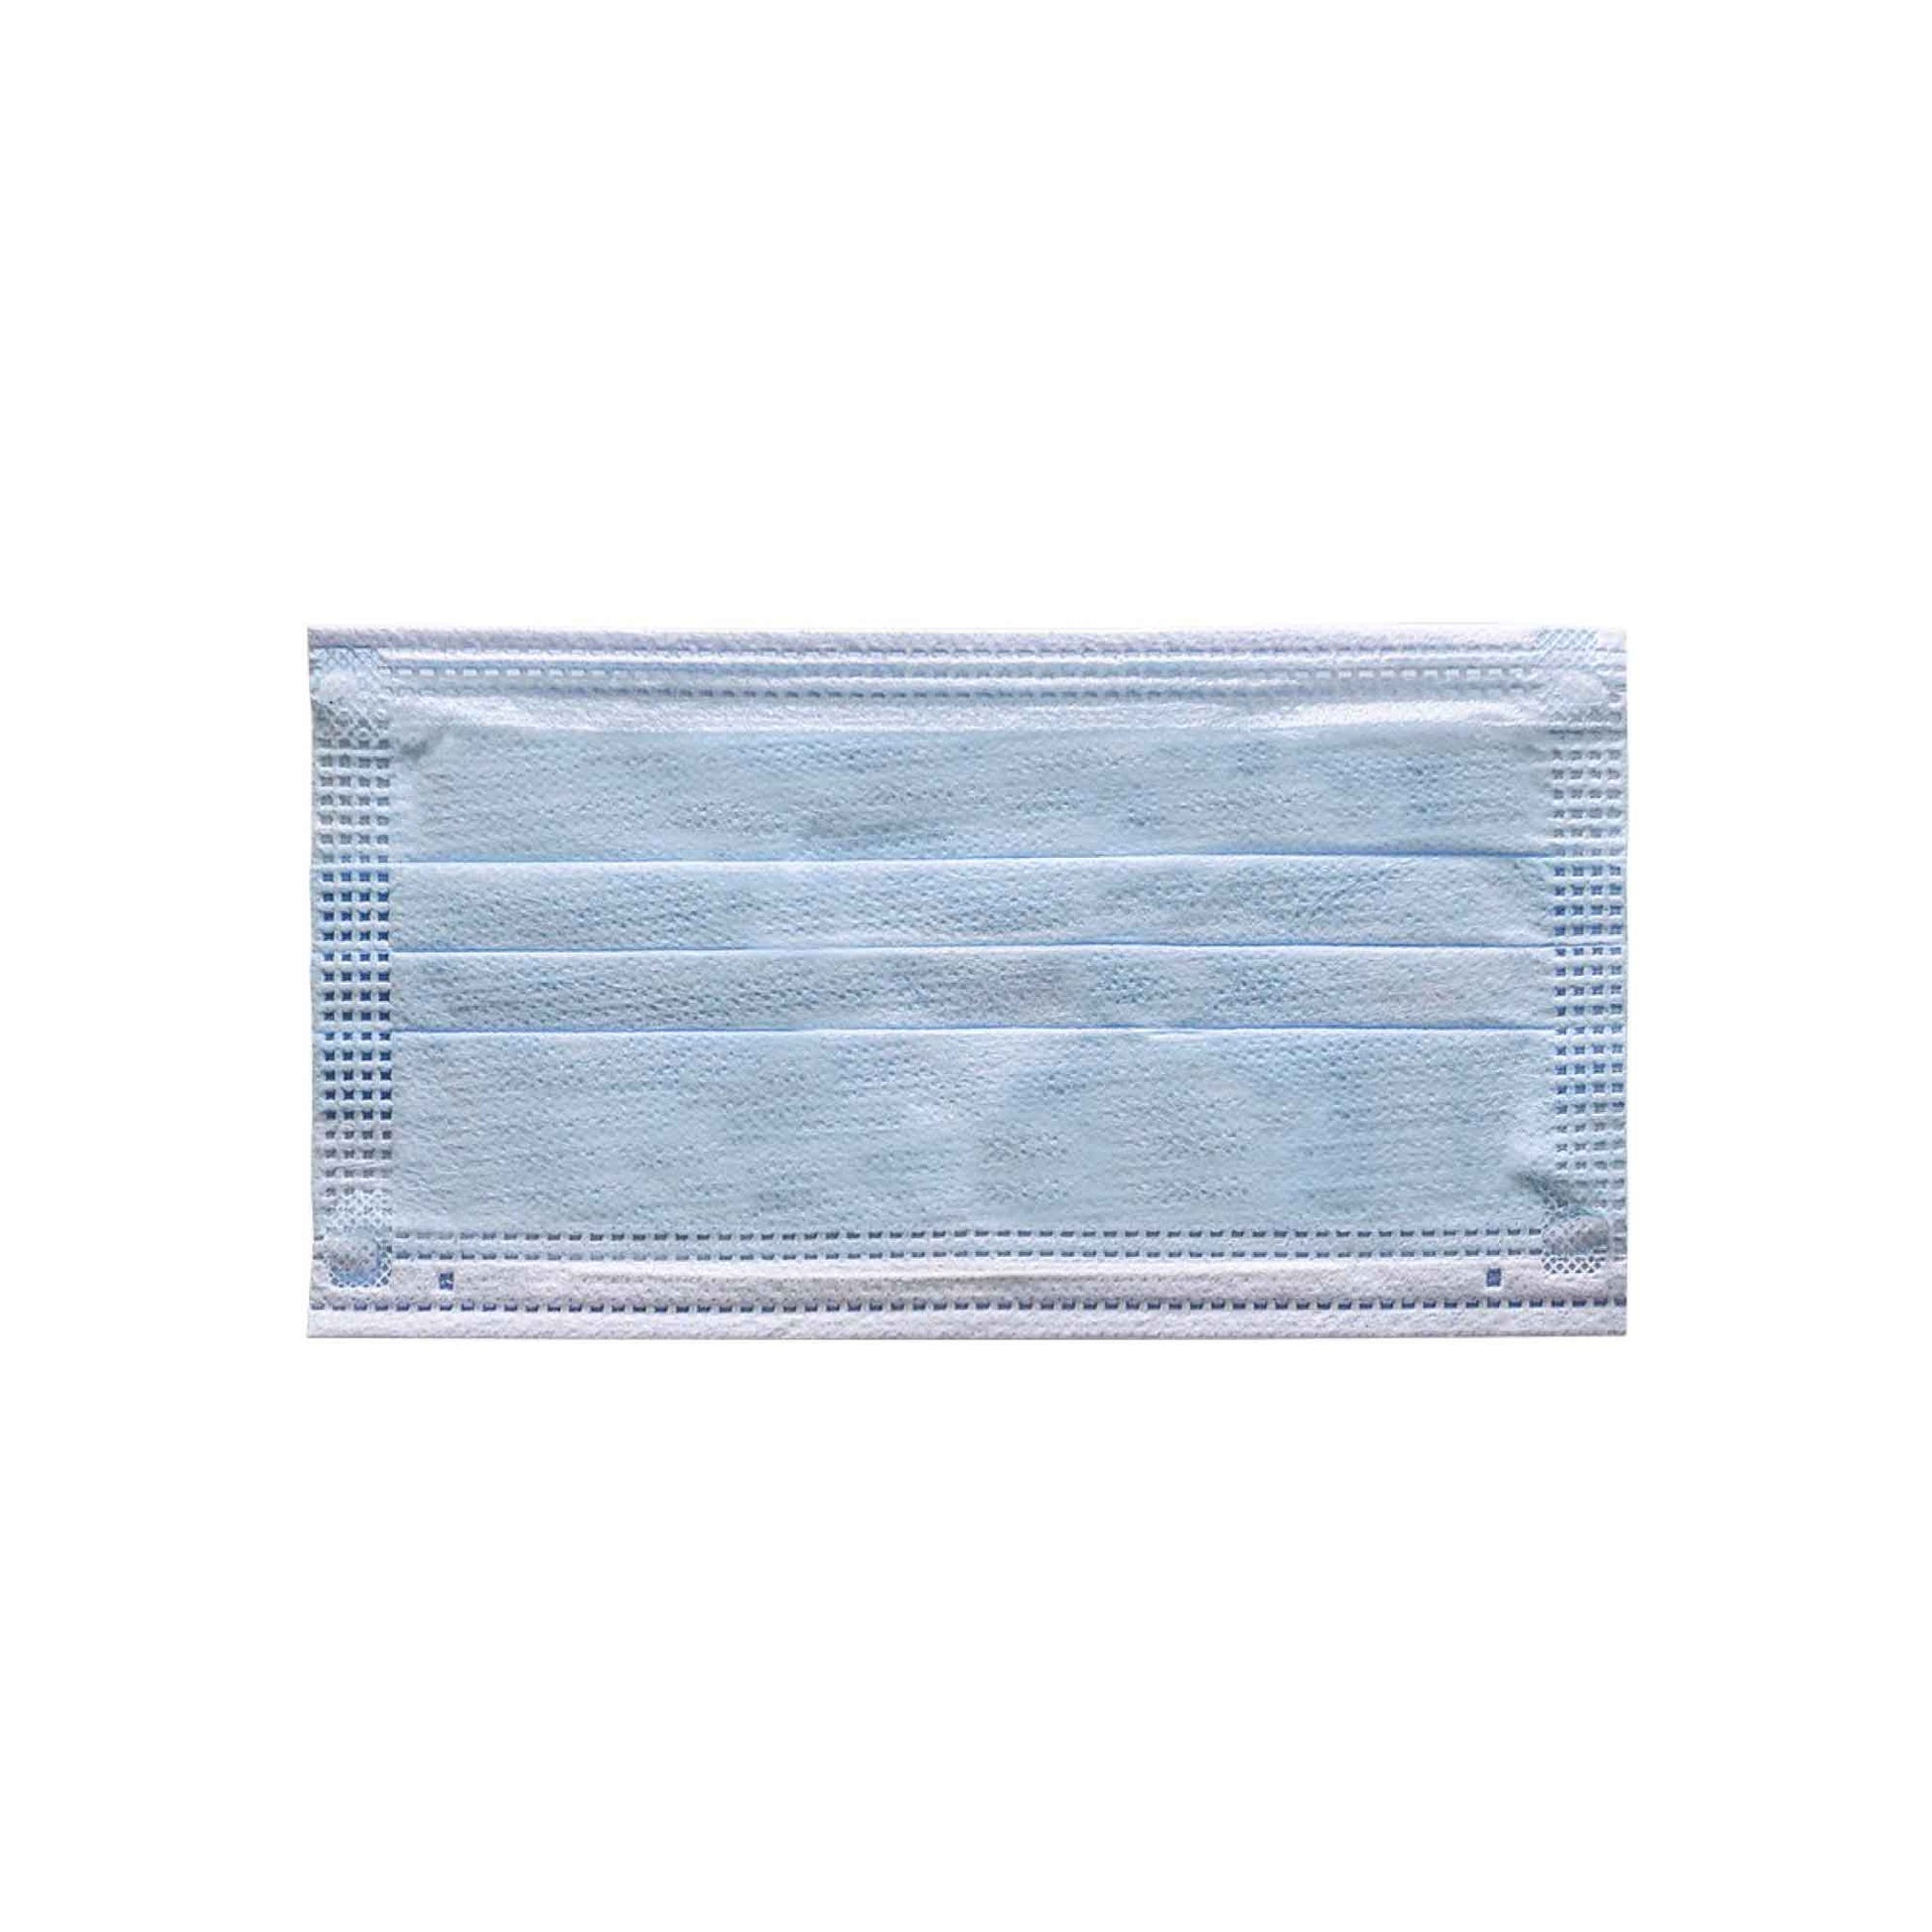 5/50 Pcs Disposable Face Mask Non-Medical 3ply Protection